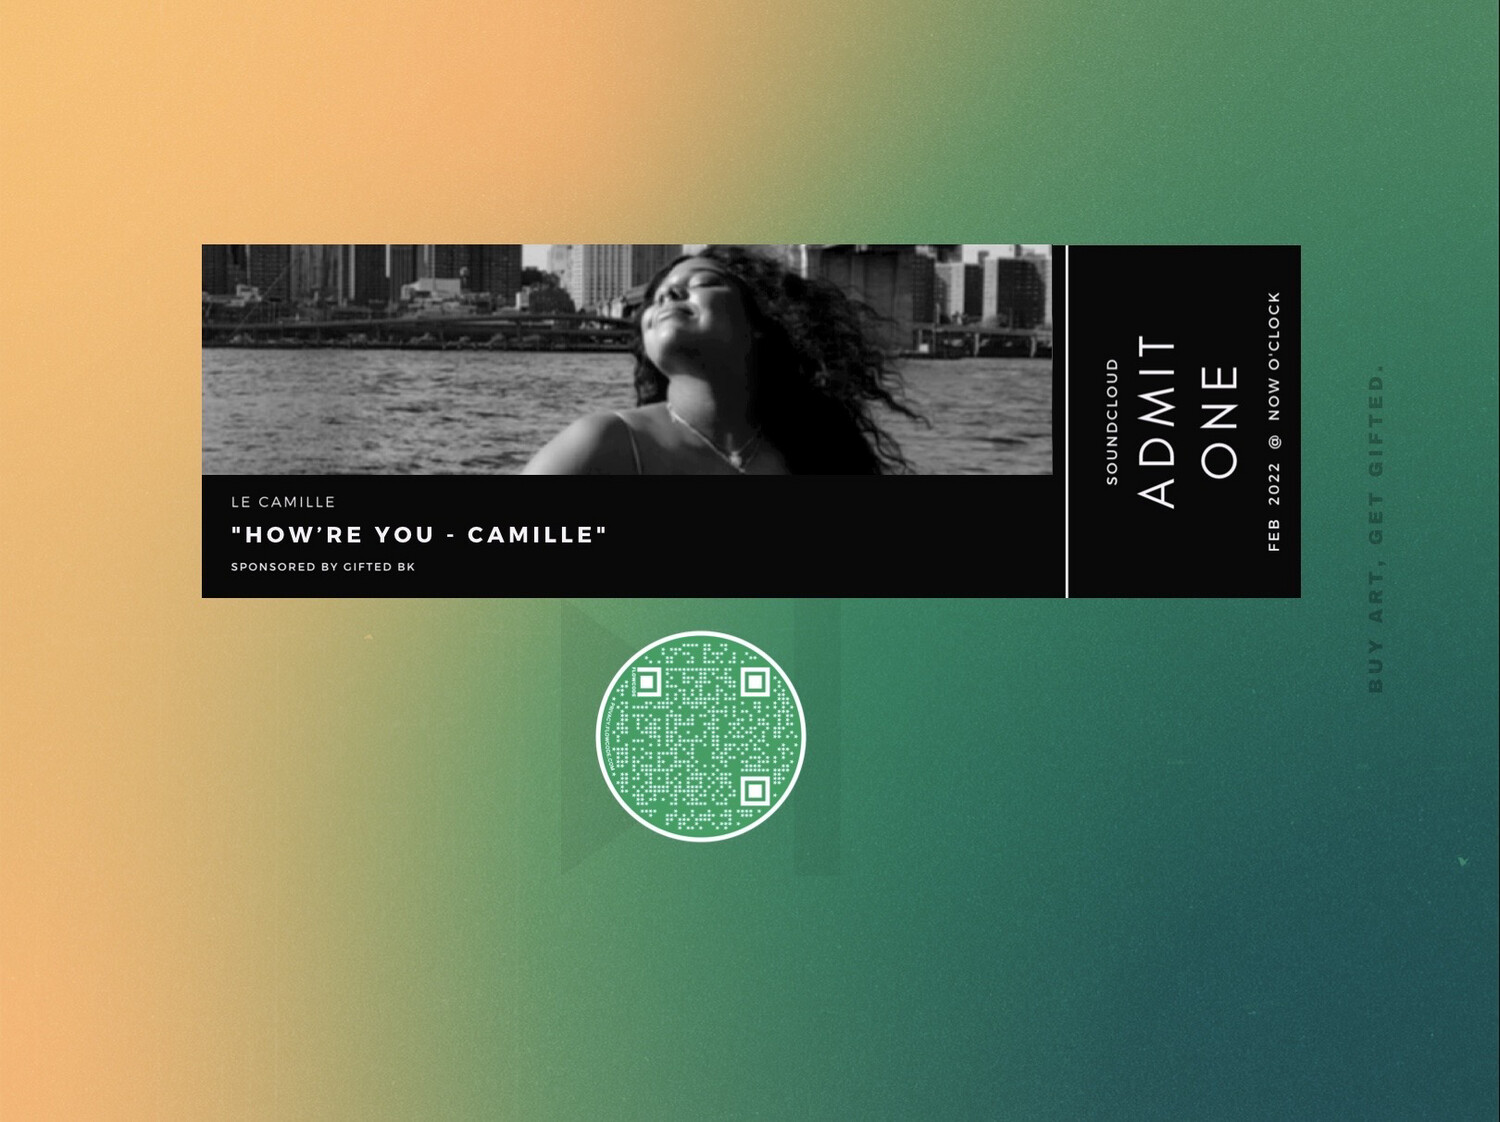 La Camille - “How’re You - Camille”